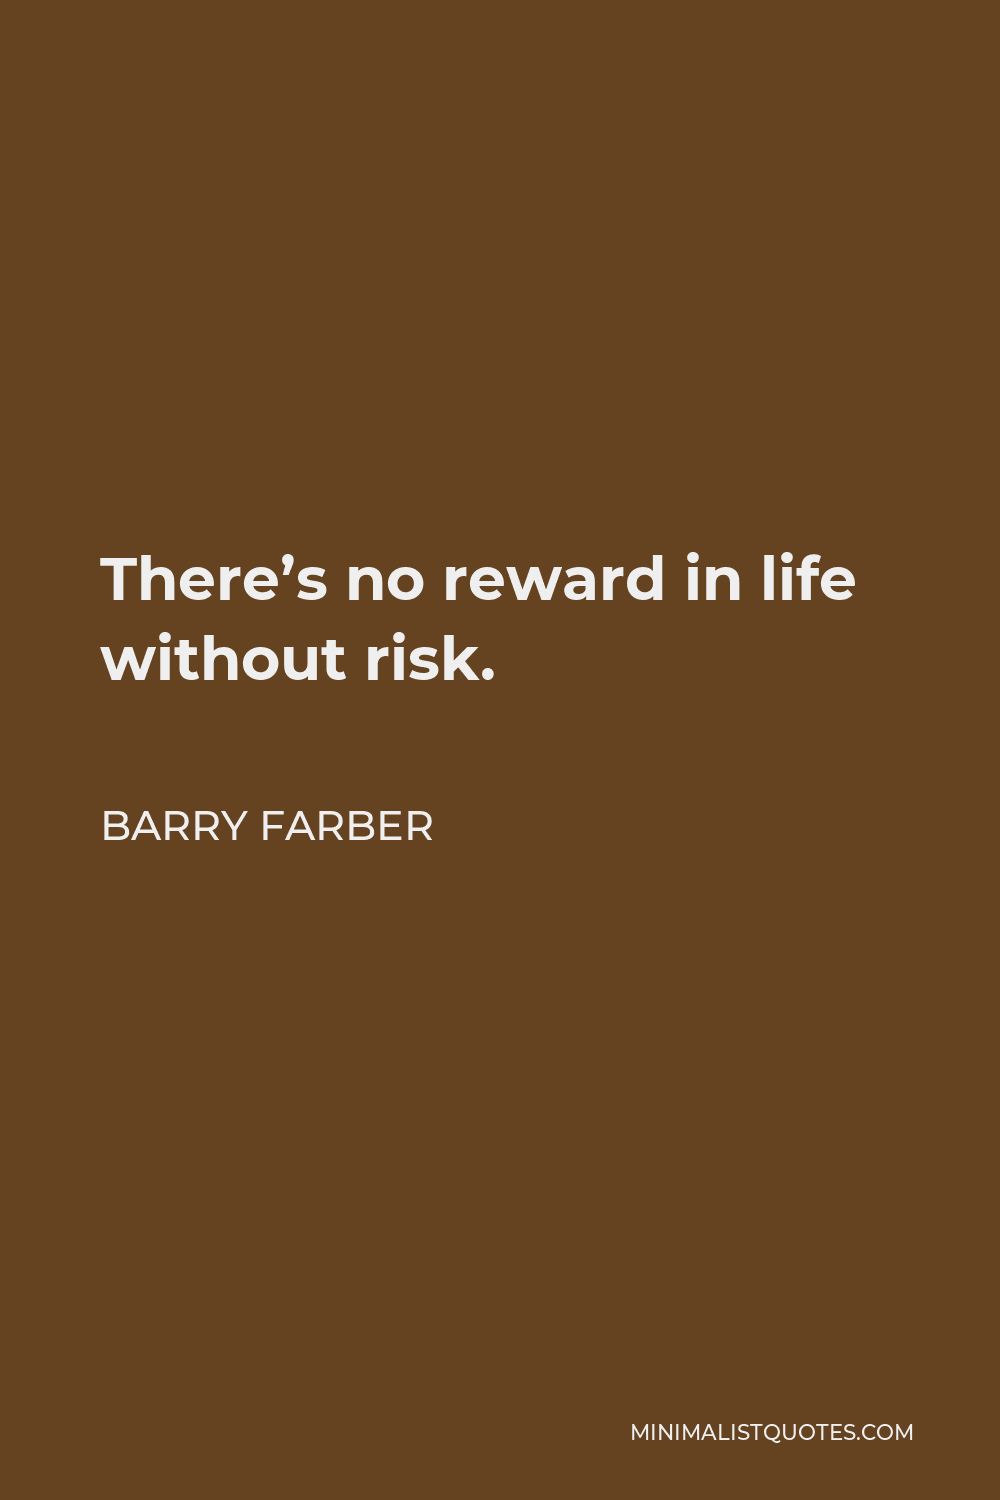 Barry Farber Quote - There’s no reward in life without risk.